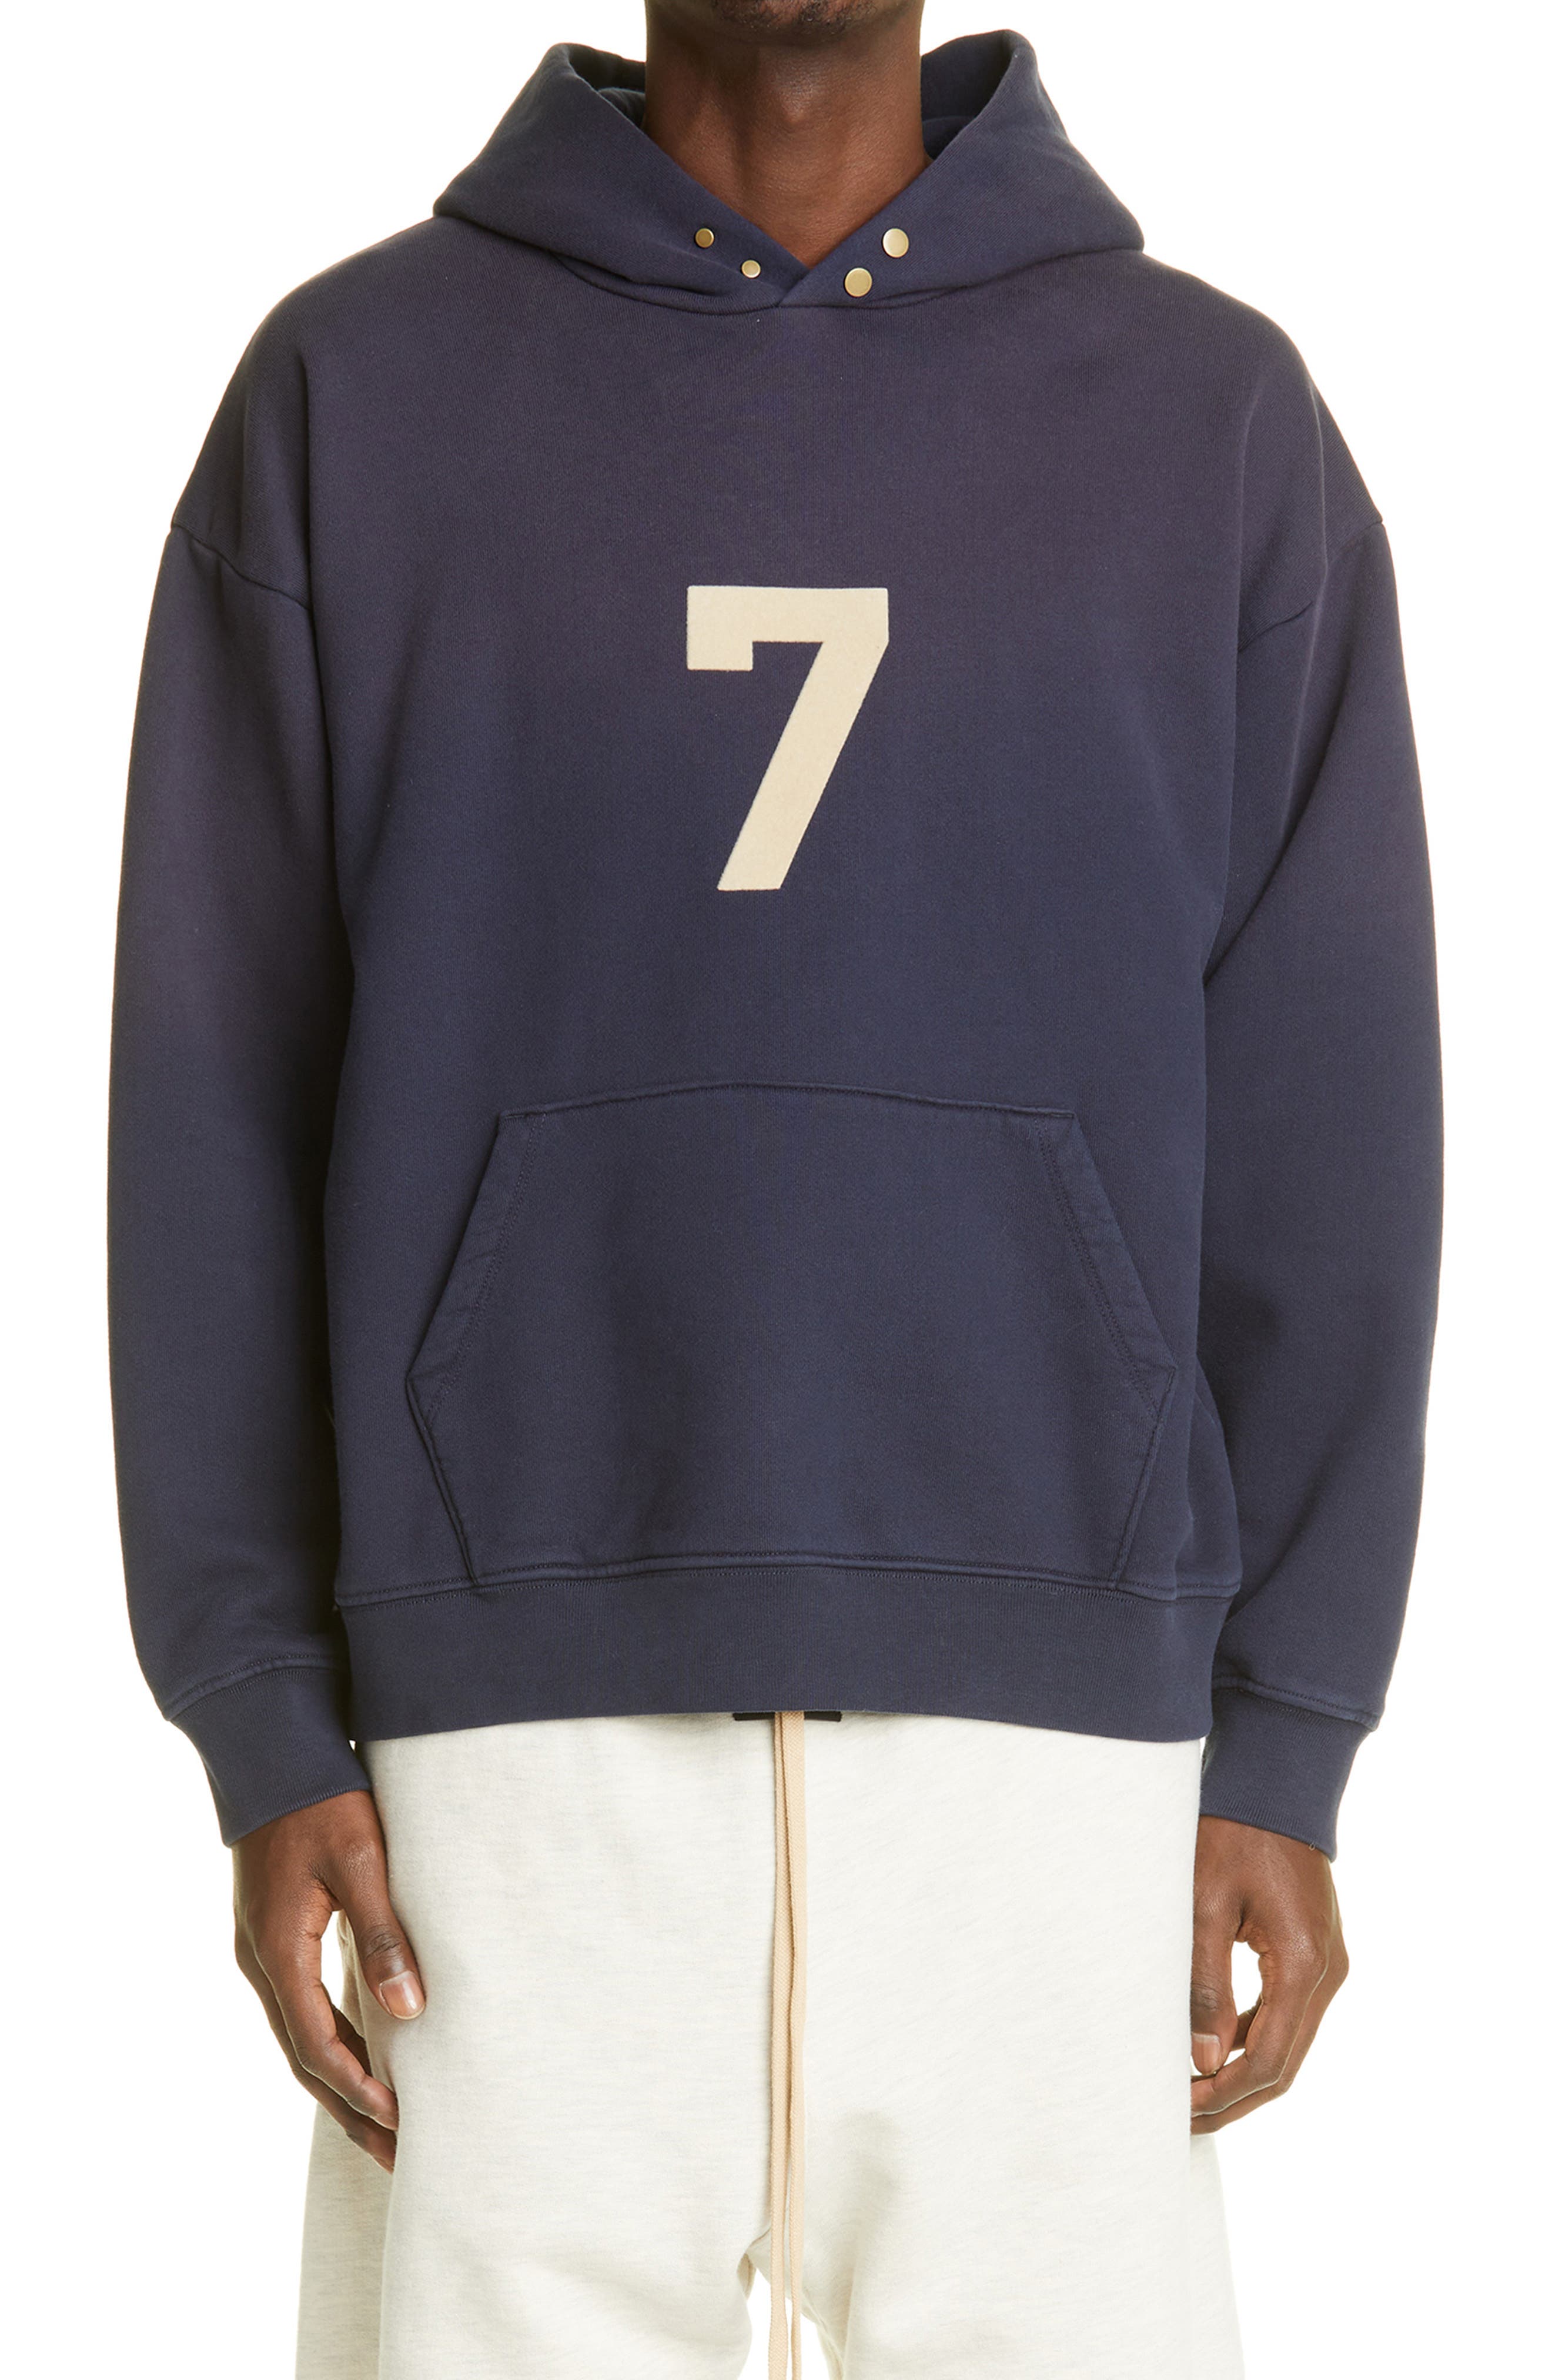 Fear of God 7 Cotton Hoodie in Vintage Navy at Nordstrom, Size Small